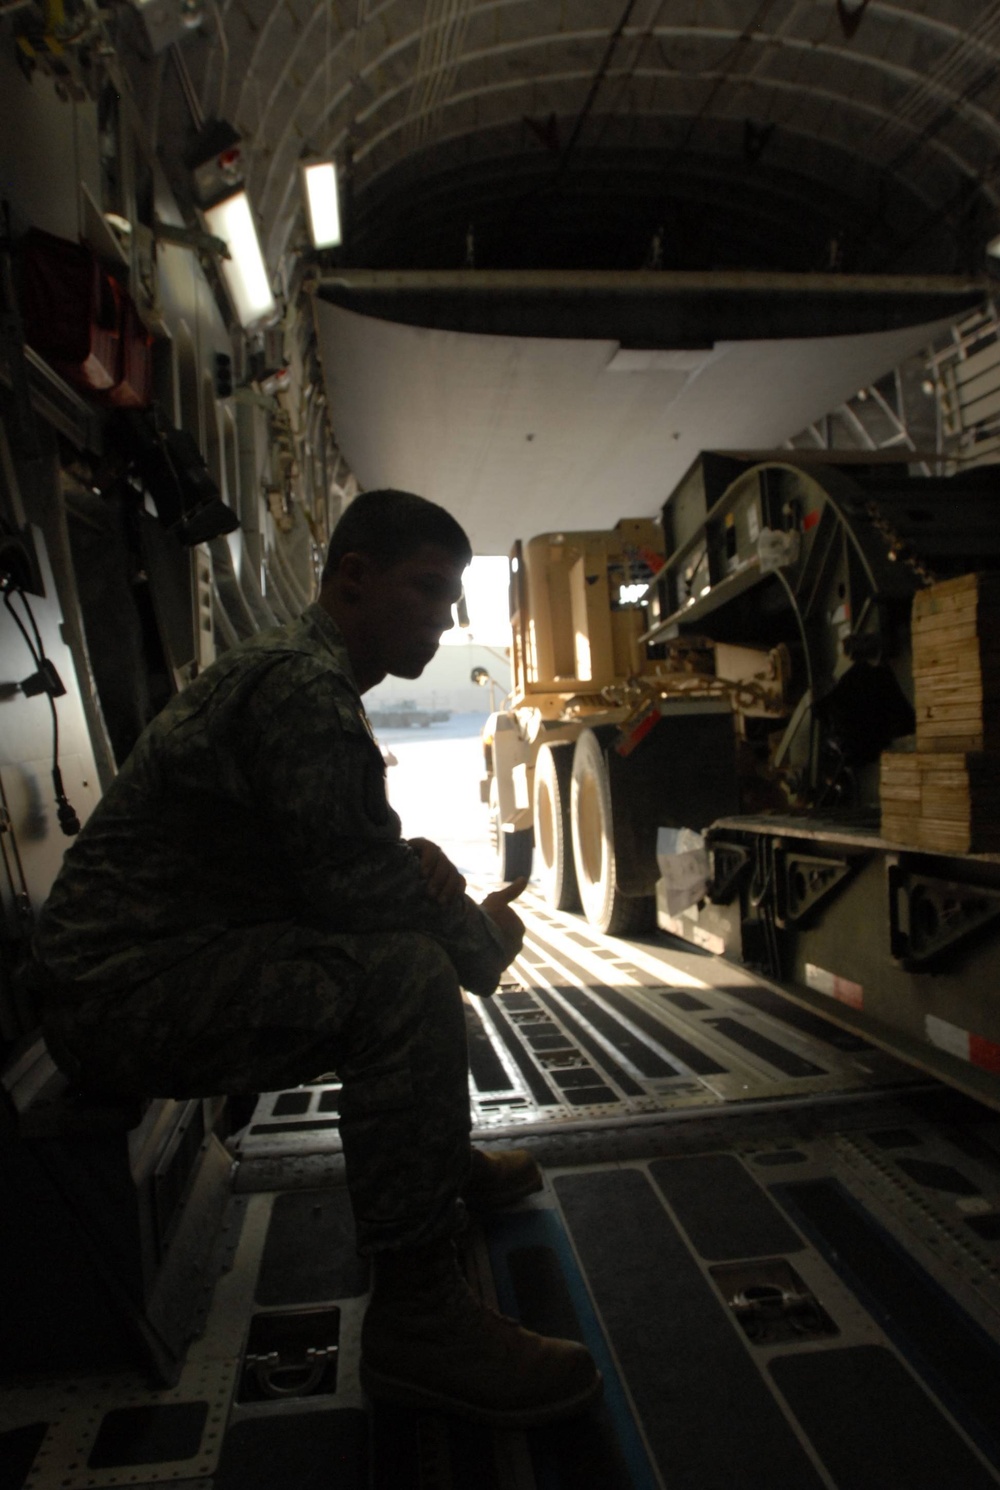 371st soldiers conduct cargo operations for Southwest Asia